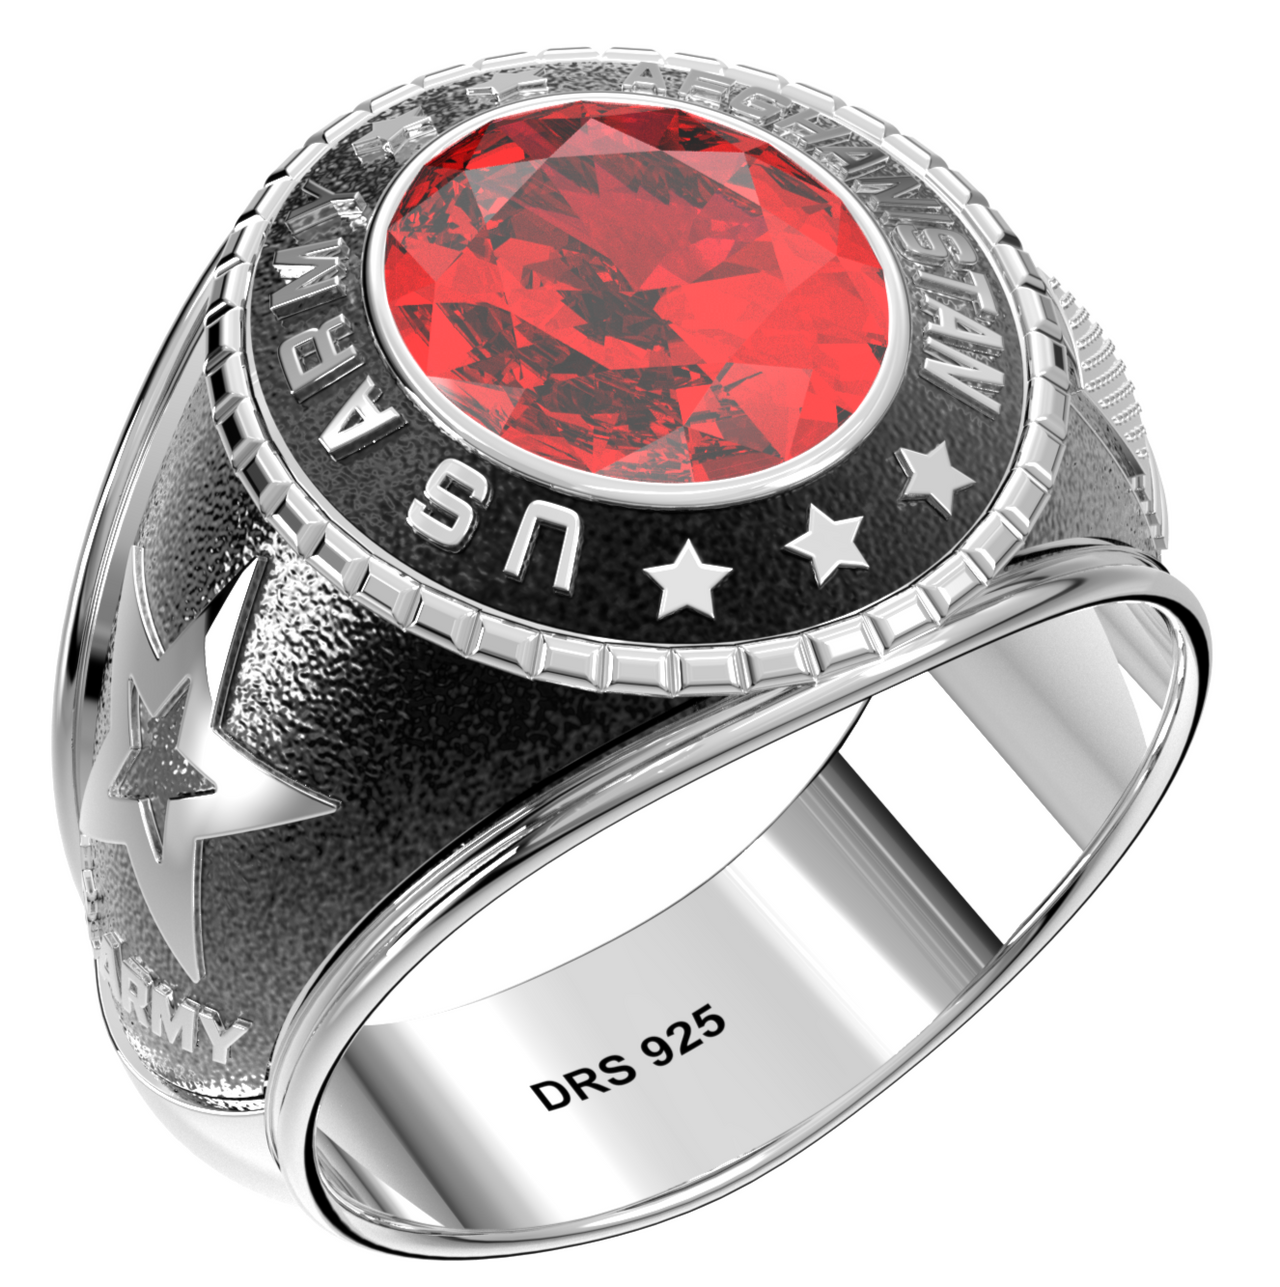 Customizable Afghanistan Men's 925 Sterling Silver US Army Military Solid Back Ring